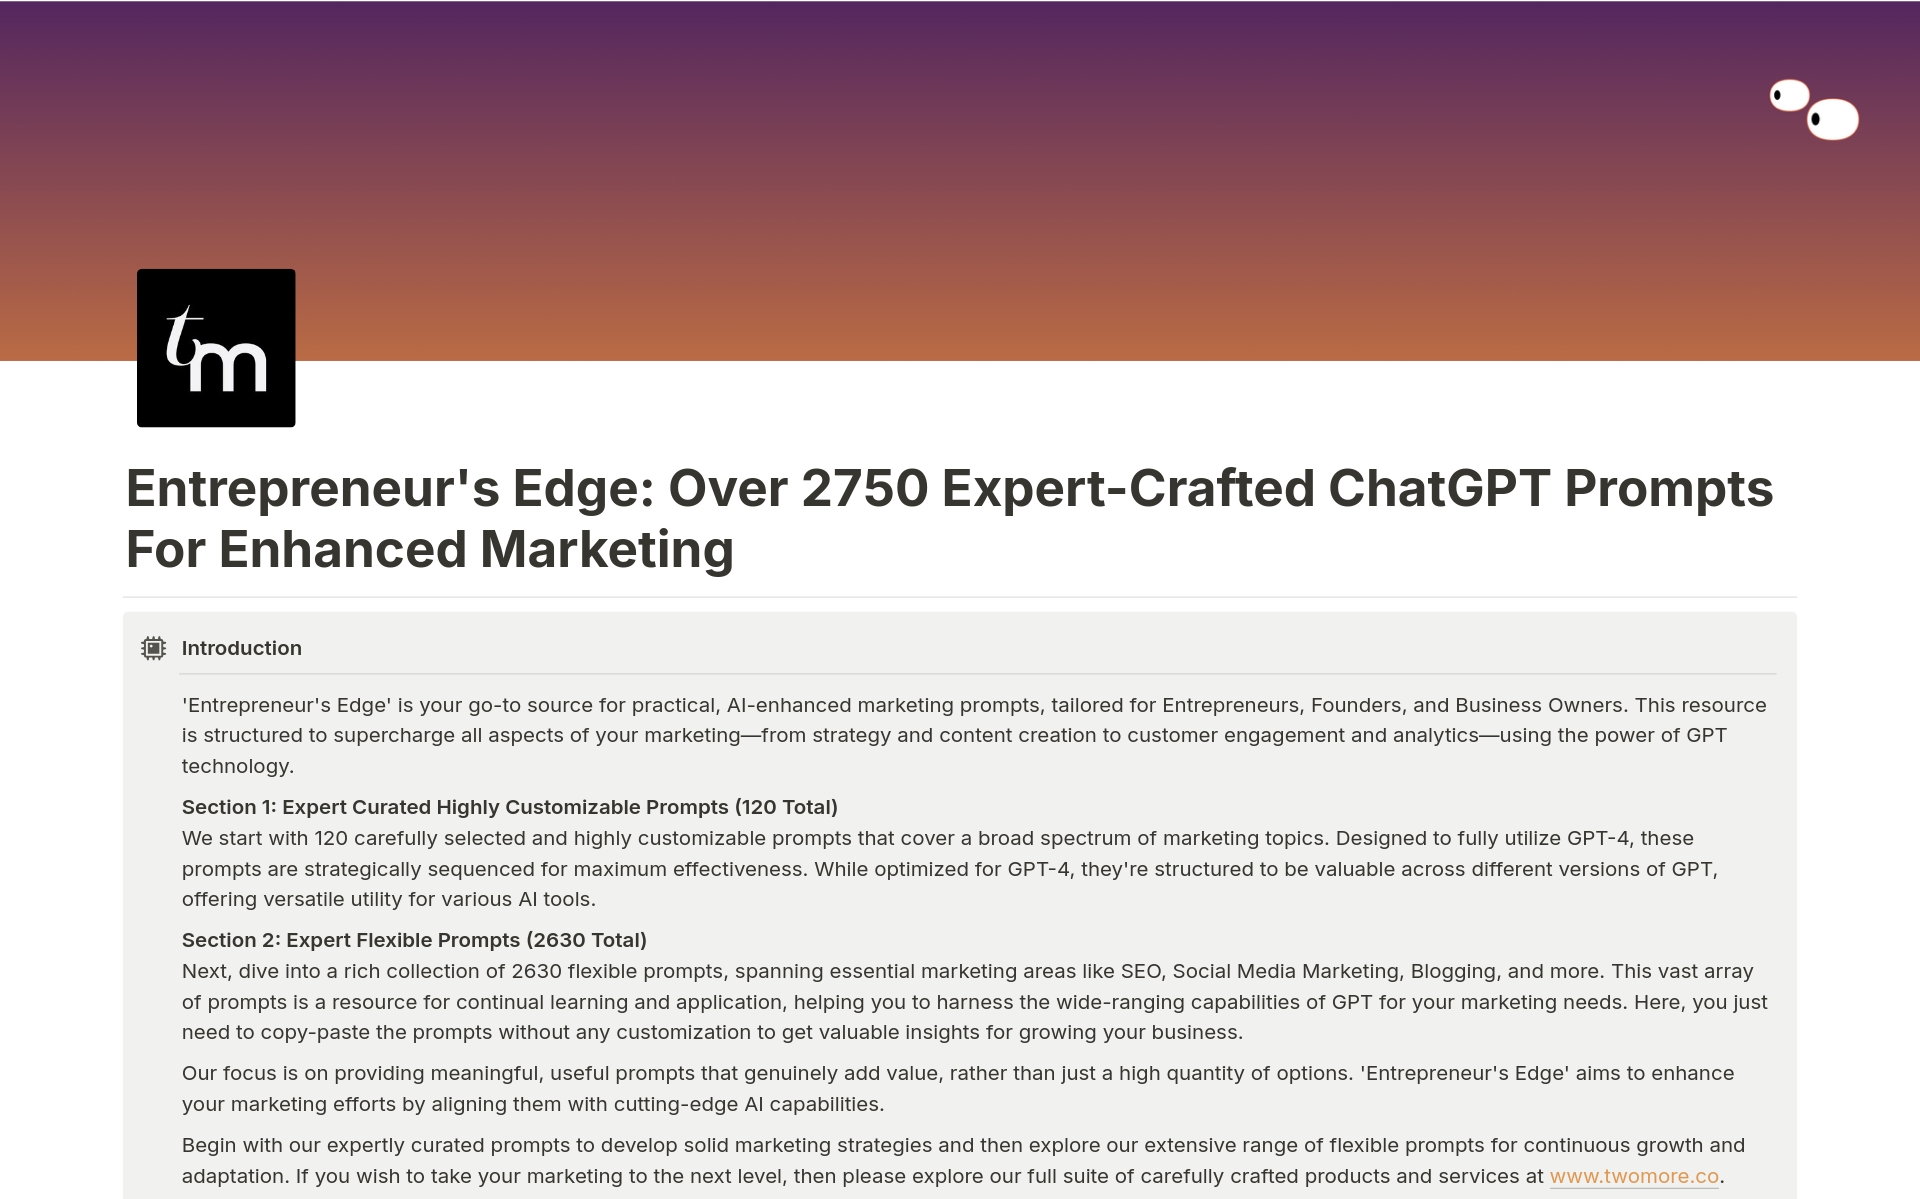 Expert-Crafted Marketing Prompts for ChatGPT のテンプレートのプレビュー